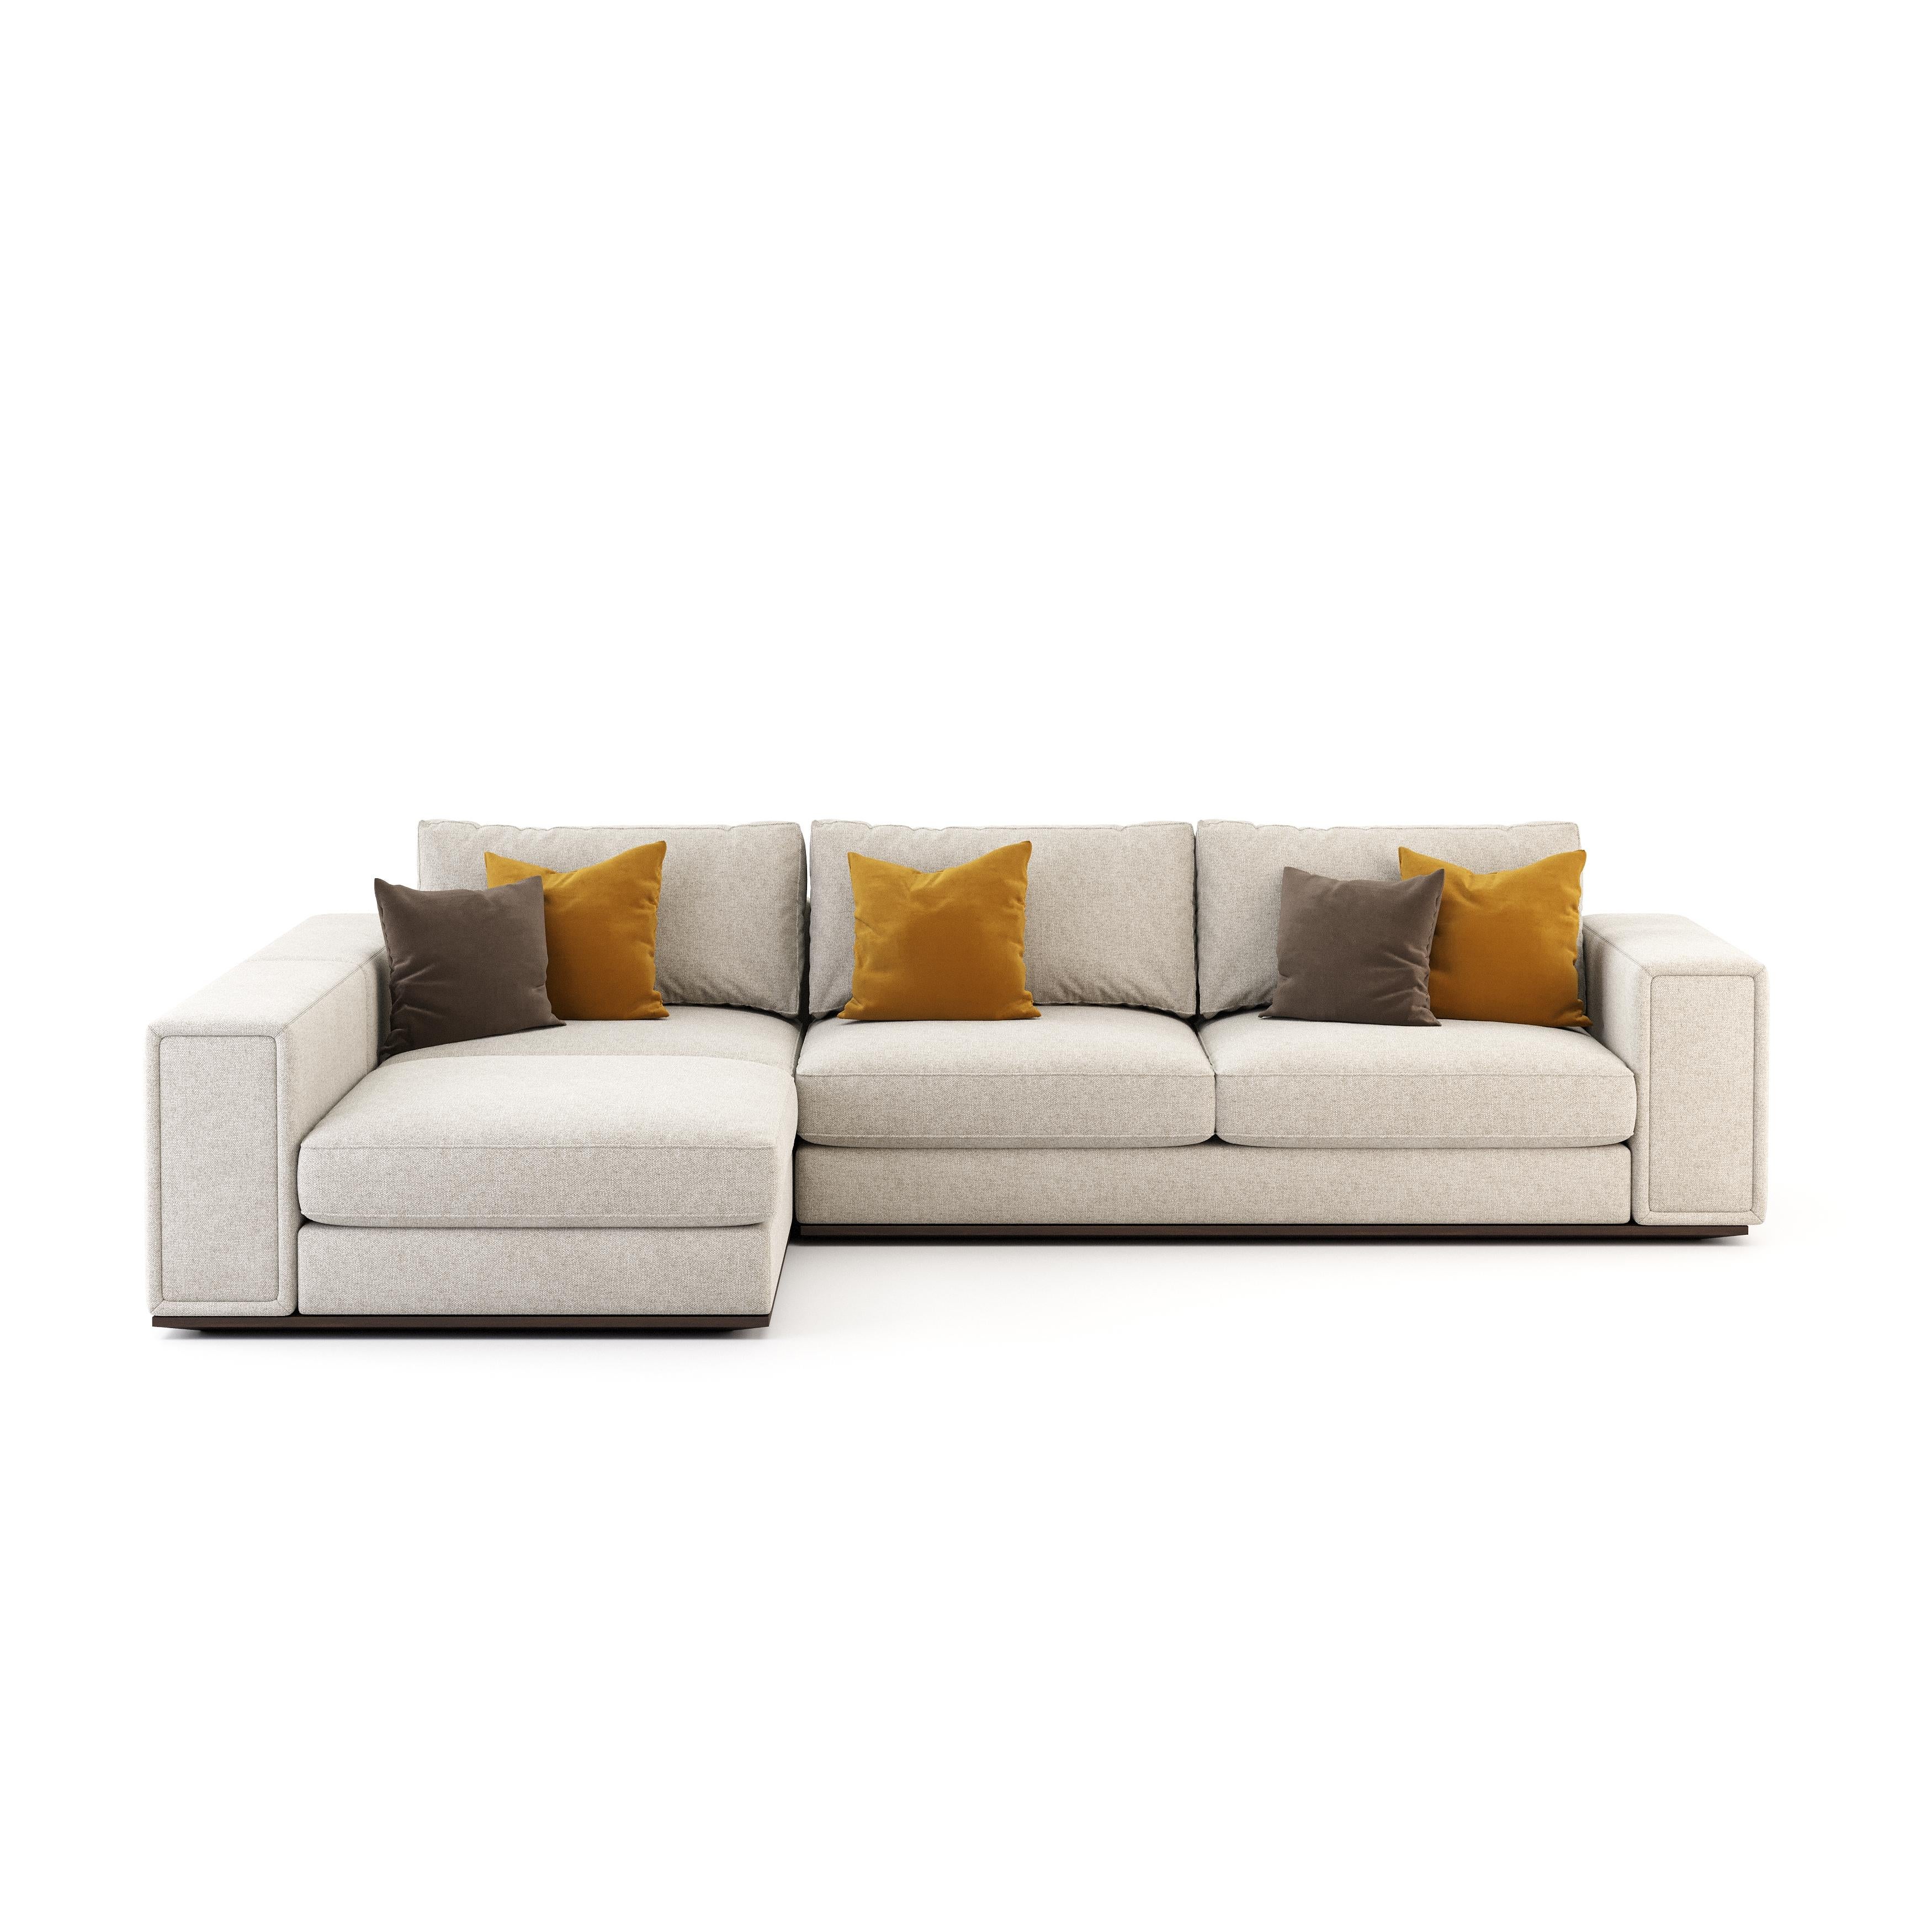 Measurement Units
2 Seats - D 100 x W 250 x H 86 cm
3 Seats - D 100 x W 350 x H 86 cm
With Chaise Longue - D 195 x W 350 x H 86 cm

Available in other configurations.

The Sublime collection is influenced by Art Deco, born under the burst of